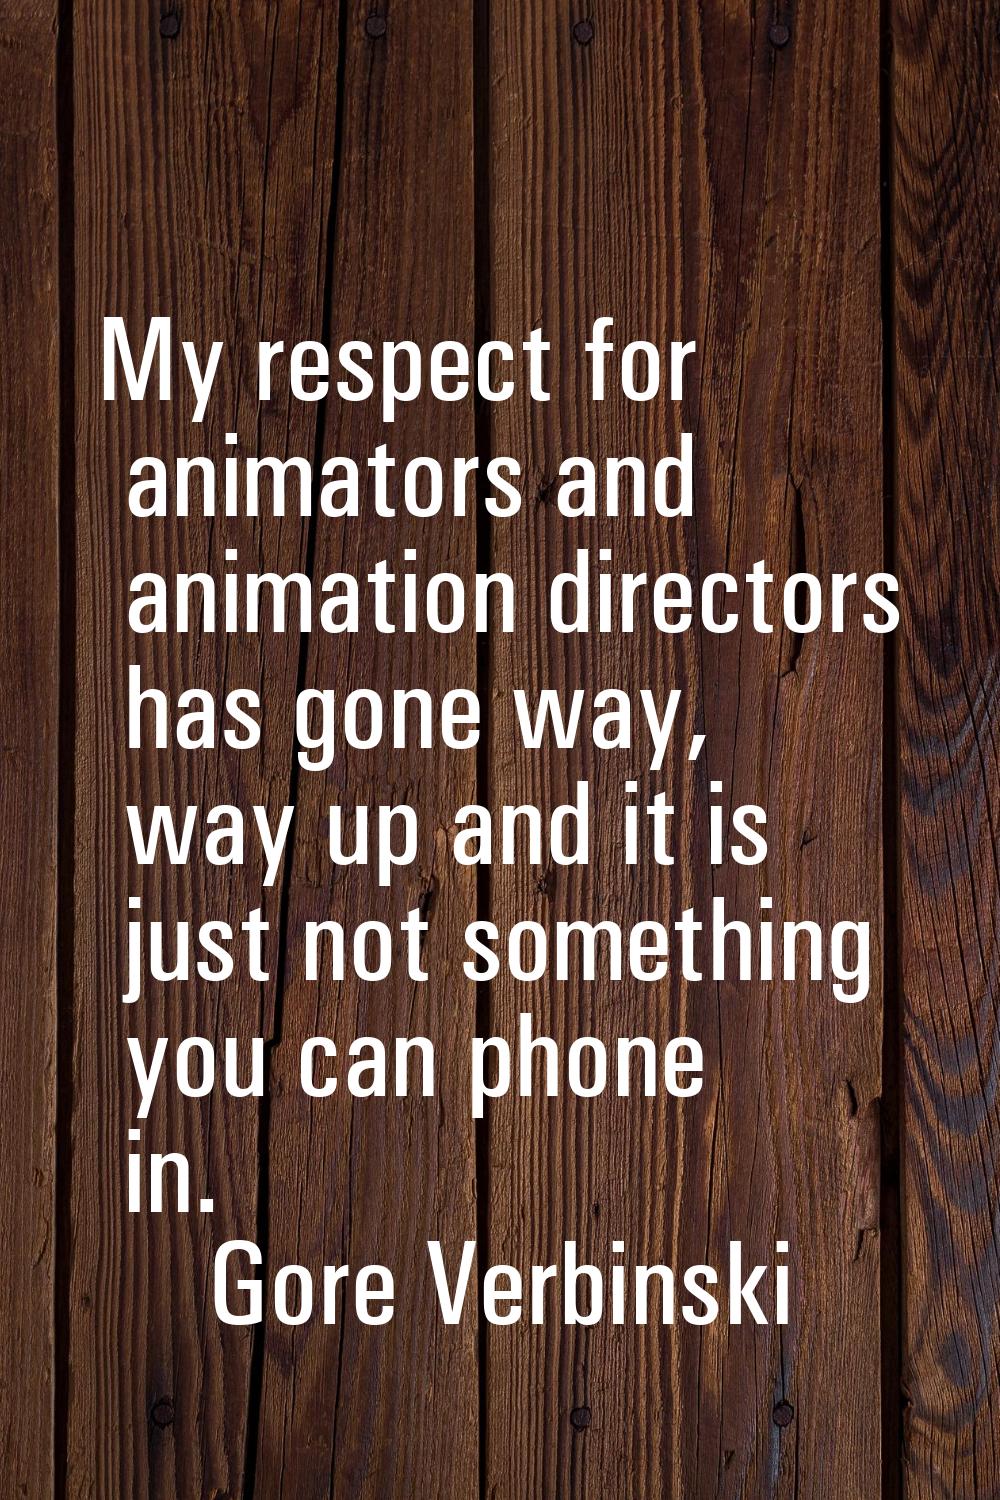 My respect for animators and animation directors has gone way, way up and it is just not something 